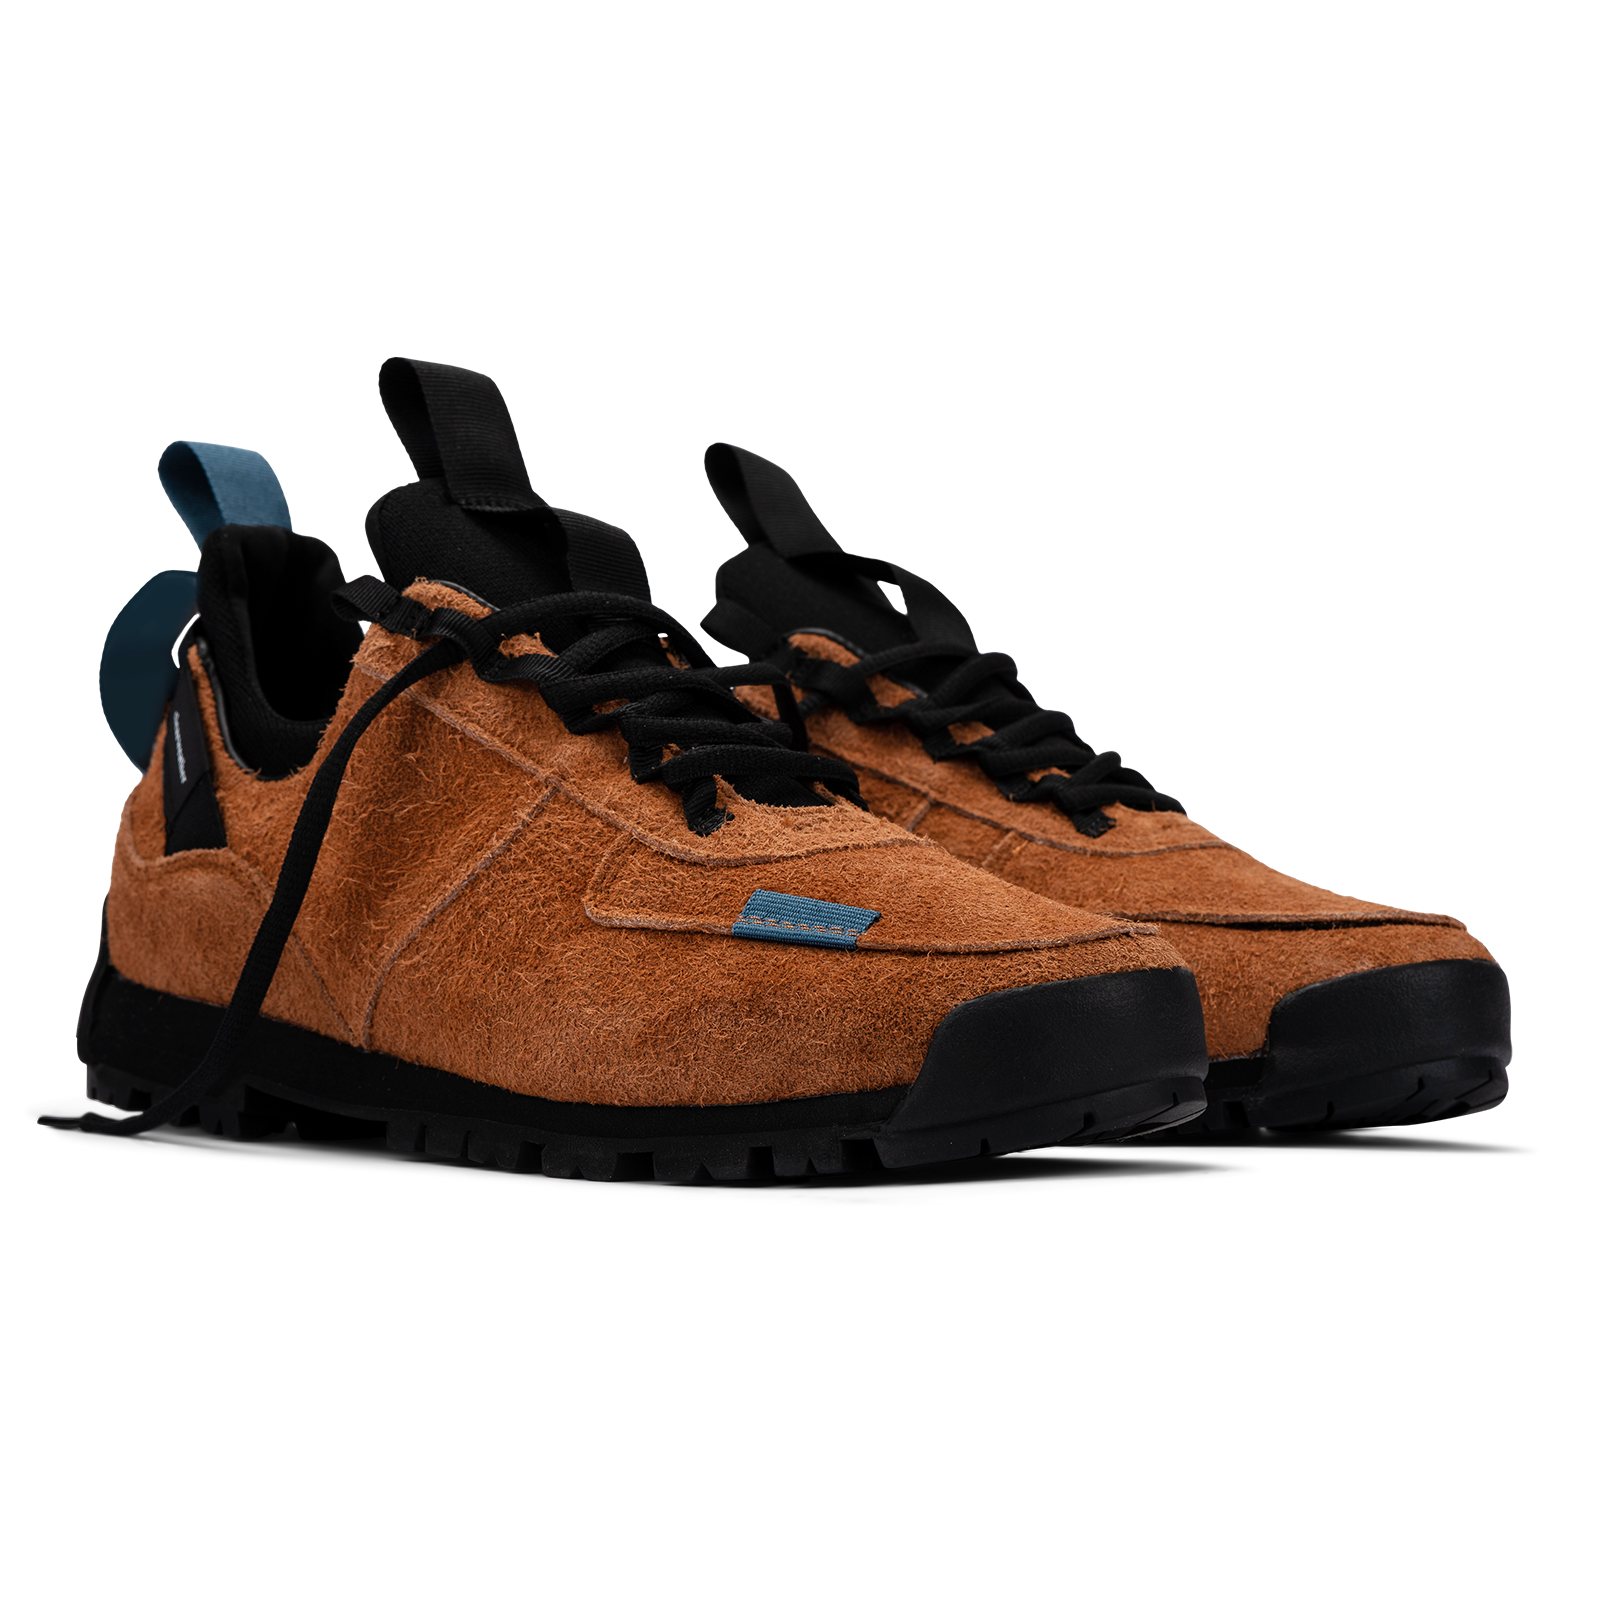 3/4 view / Approach / Auburn color features tabaco colored hairy suede upper, gross grain webbing for laces. helastic heel detail, stretch mesh internal bootie, vintrage vibram hiking outsole and eva midsole. 